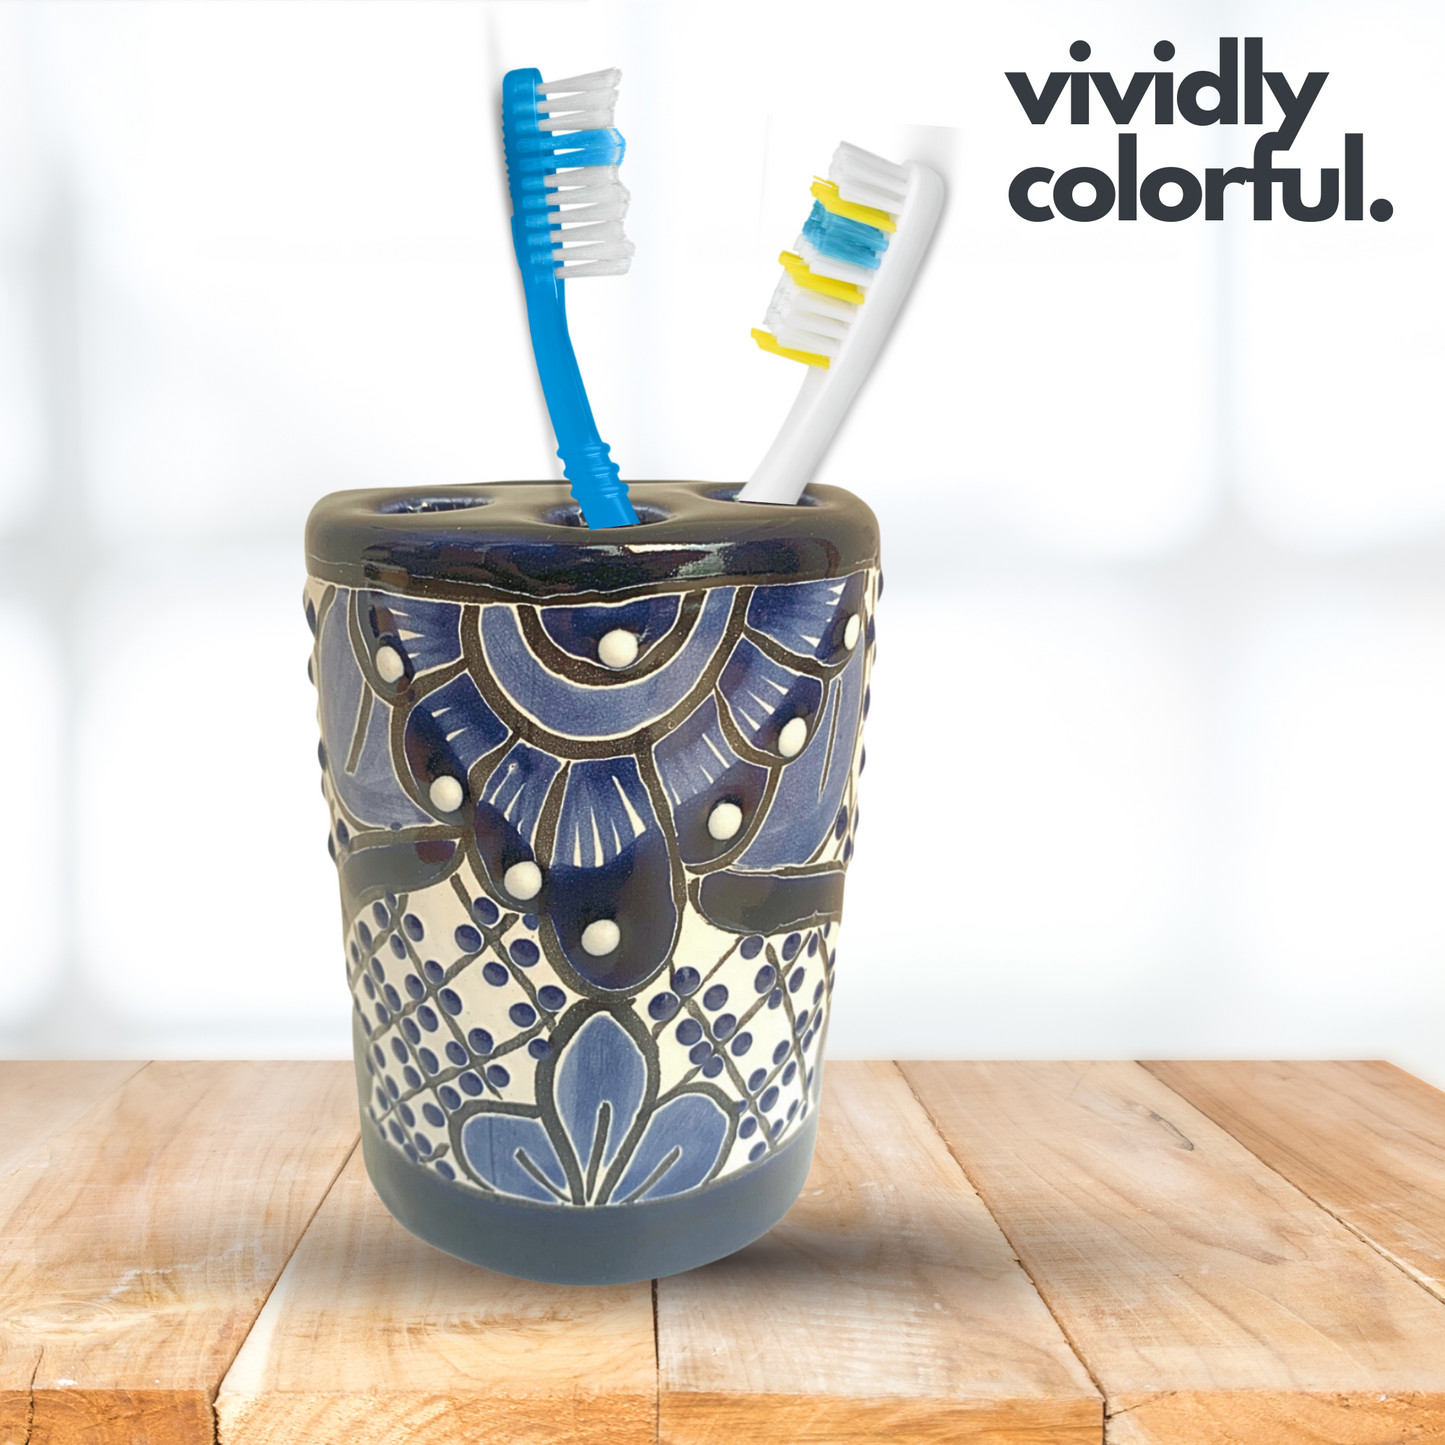 vividly colorful Hand-painted Talavera Toothbrush Holder by Casa Fiesta Designs, offers compact storage and adds charm to your bathroom.